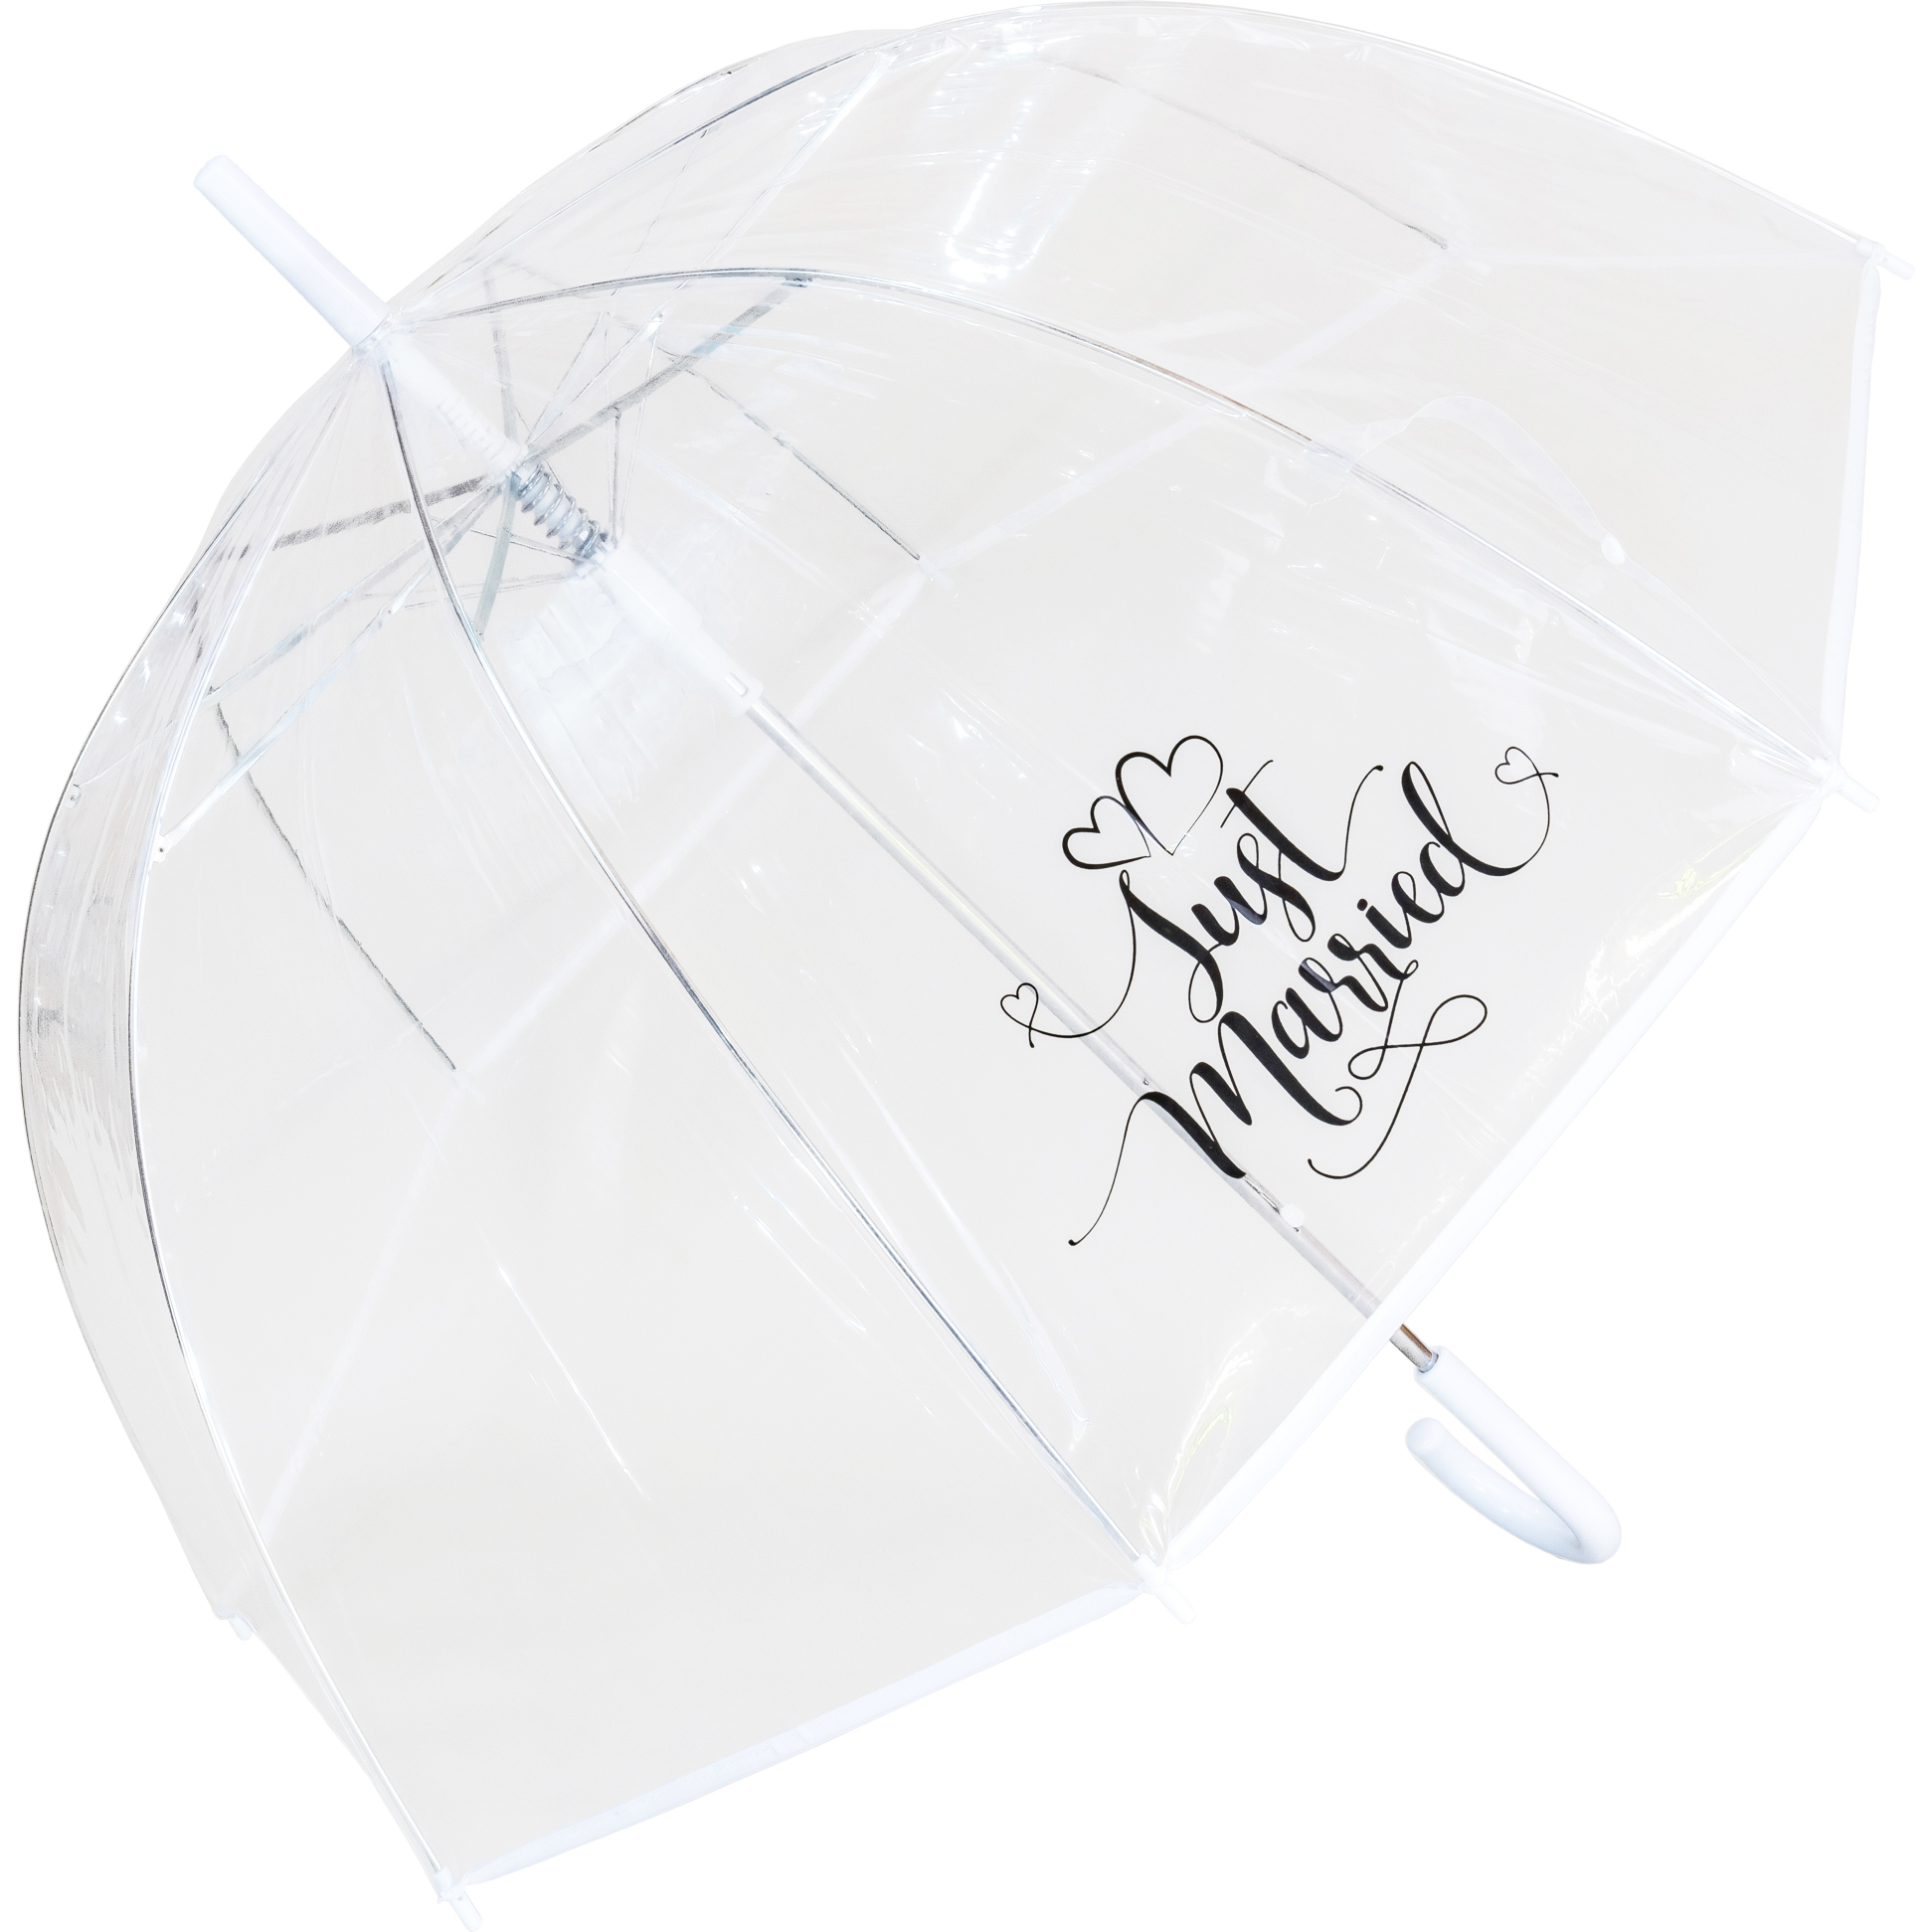 Just Married Dome Umbrella (18036R)